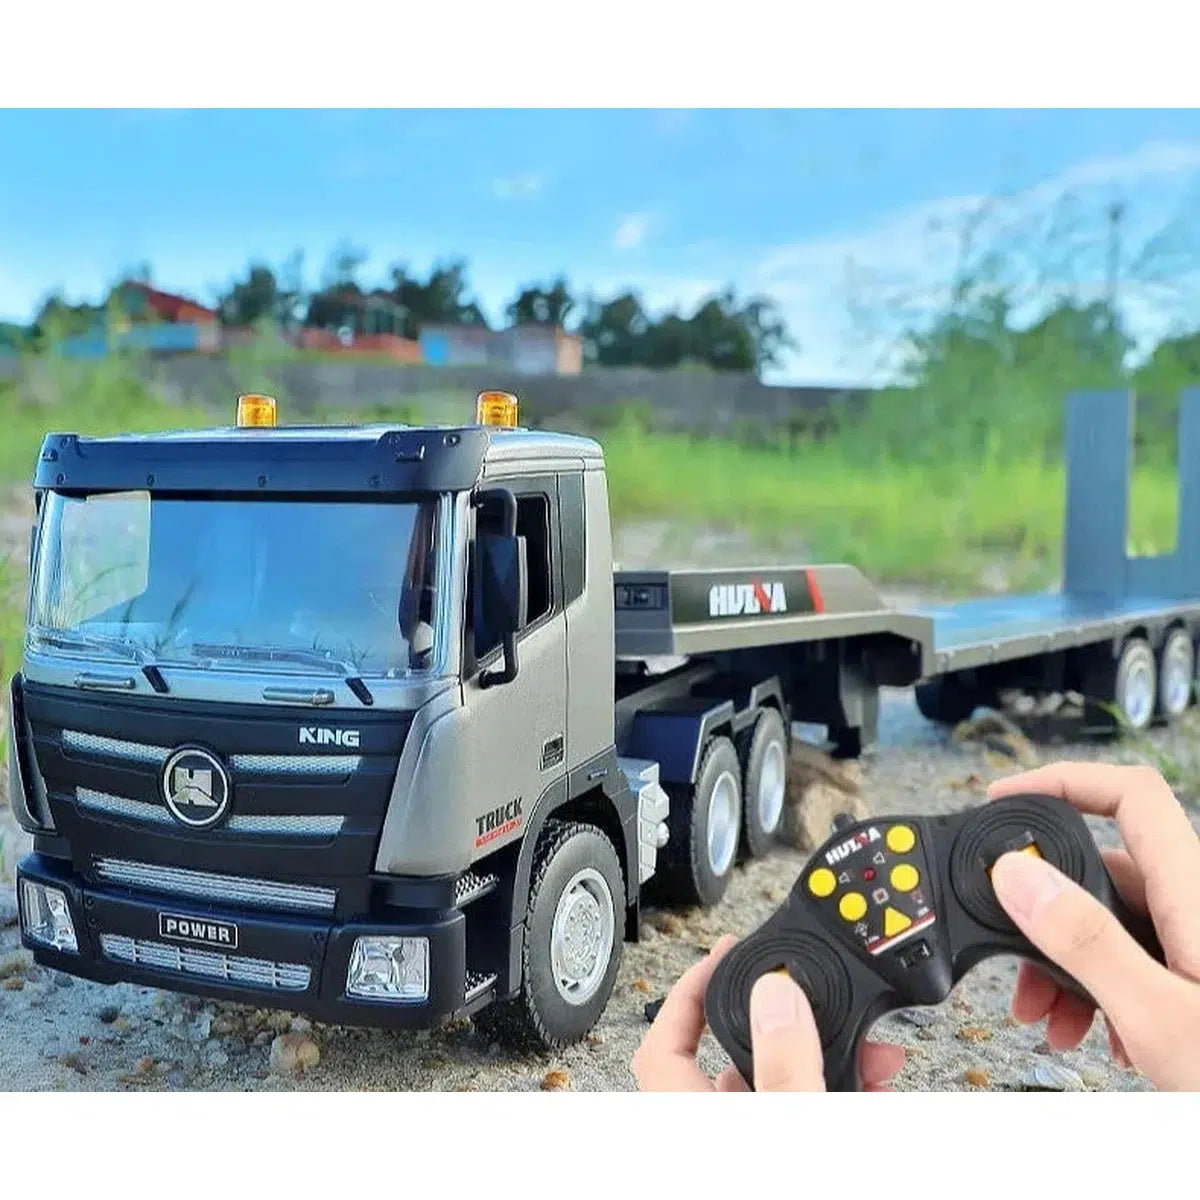 Mercedes Rc Truck and Trailer 1:24 Scale